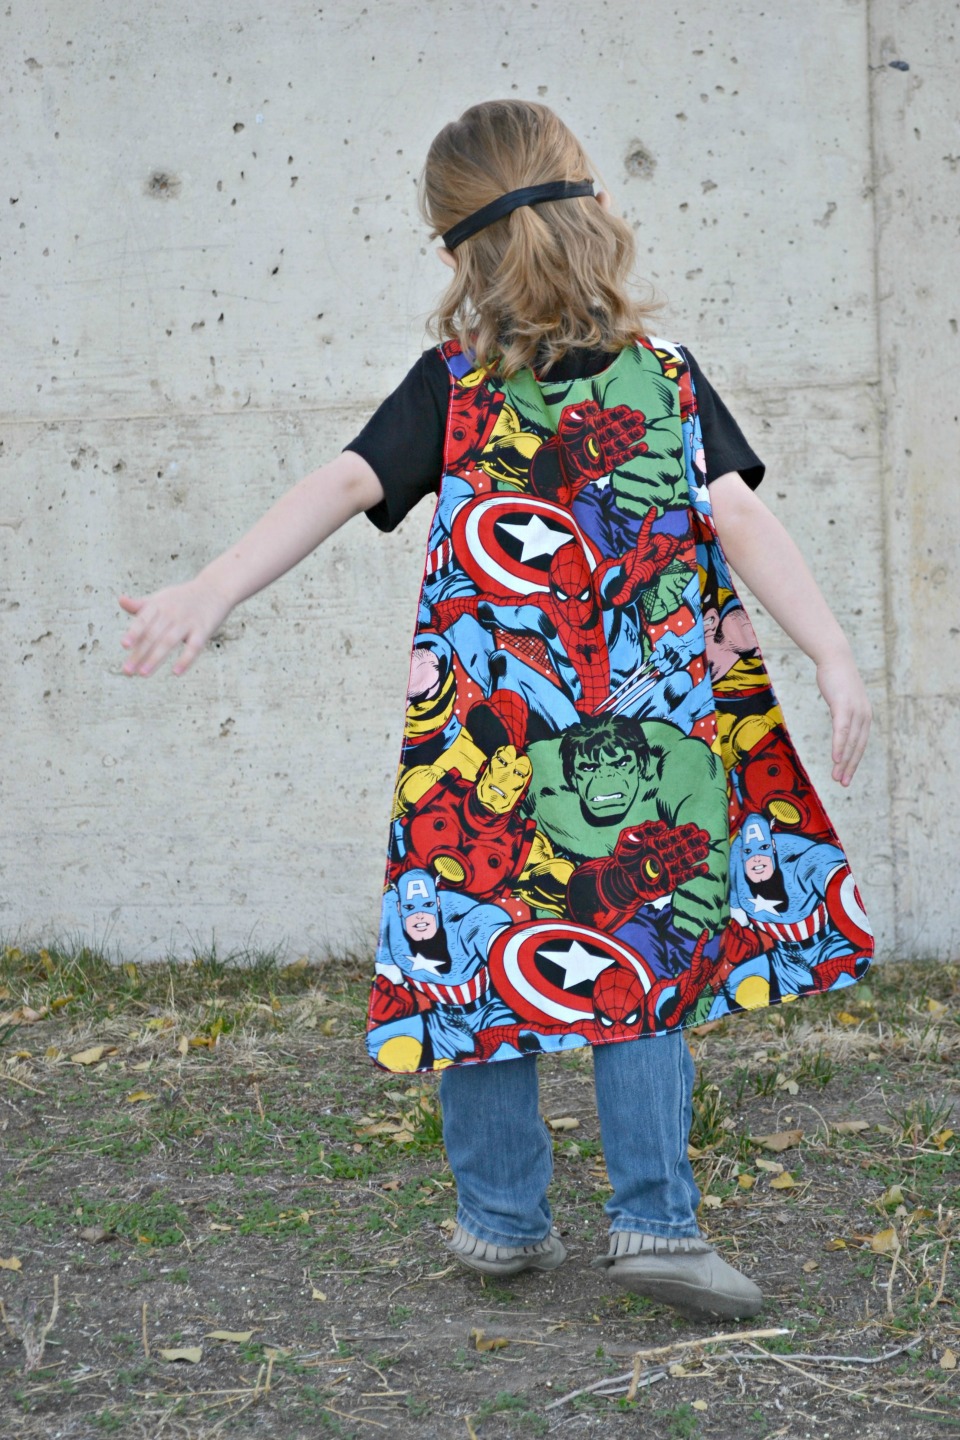 Free DIY Superhero Cape and Mask pattern. Would be great for Halloween or the dress up box!